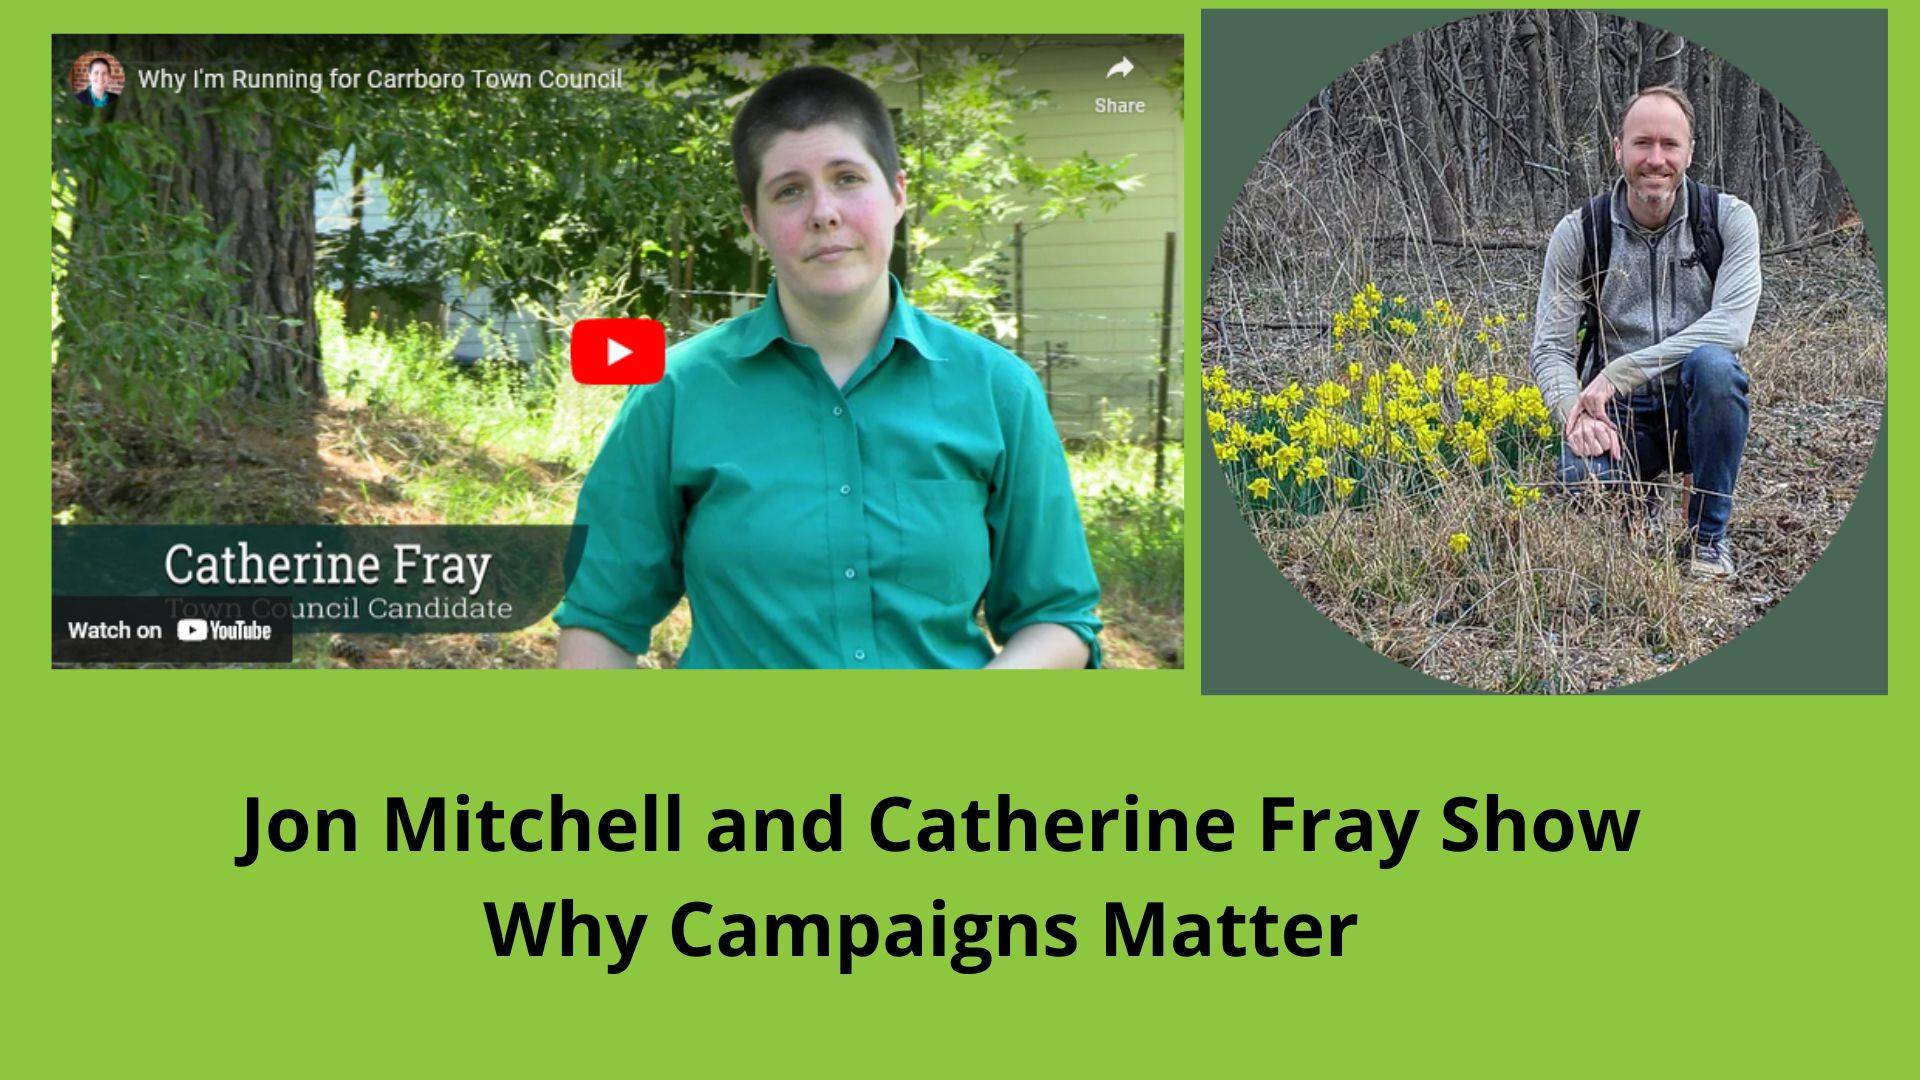 Jon Mitchell and Catherine Fray Show Why Campaigns Matter